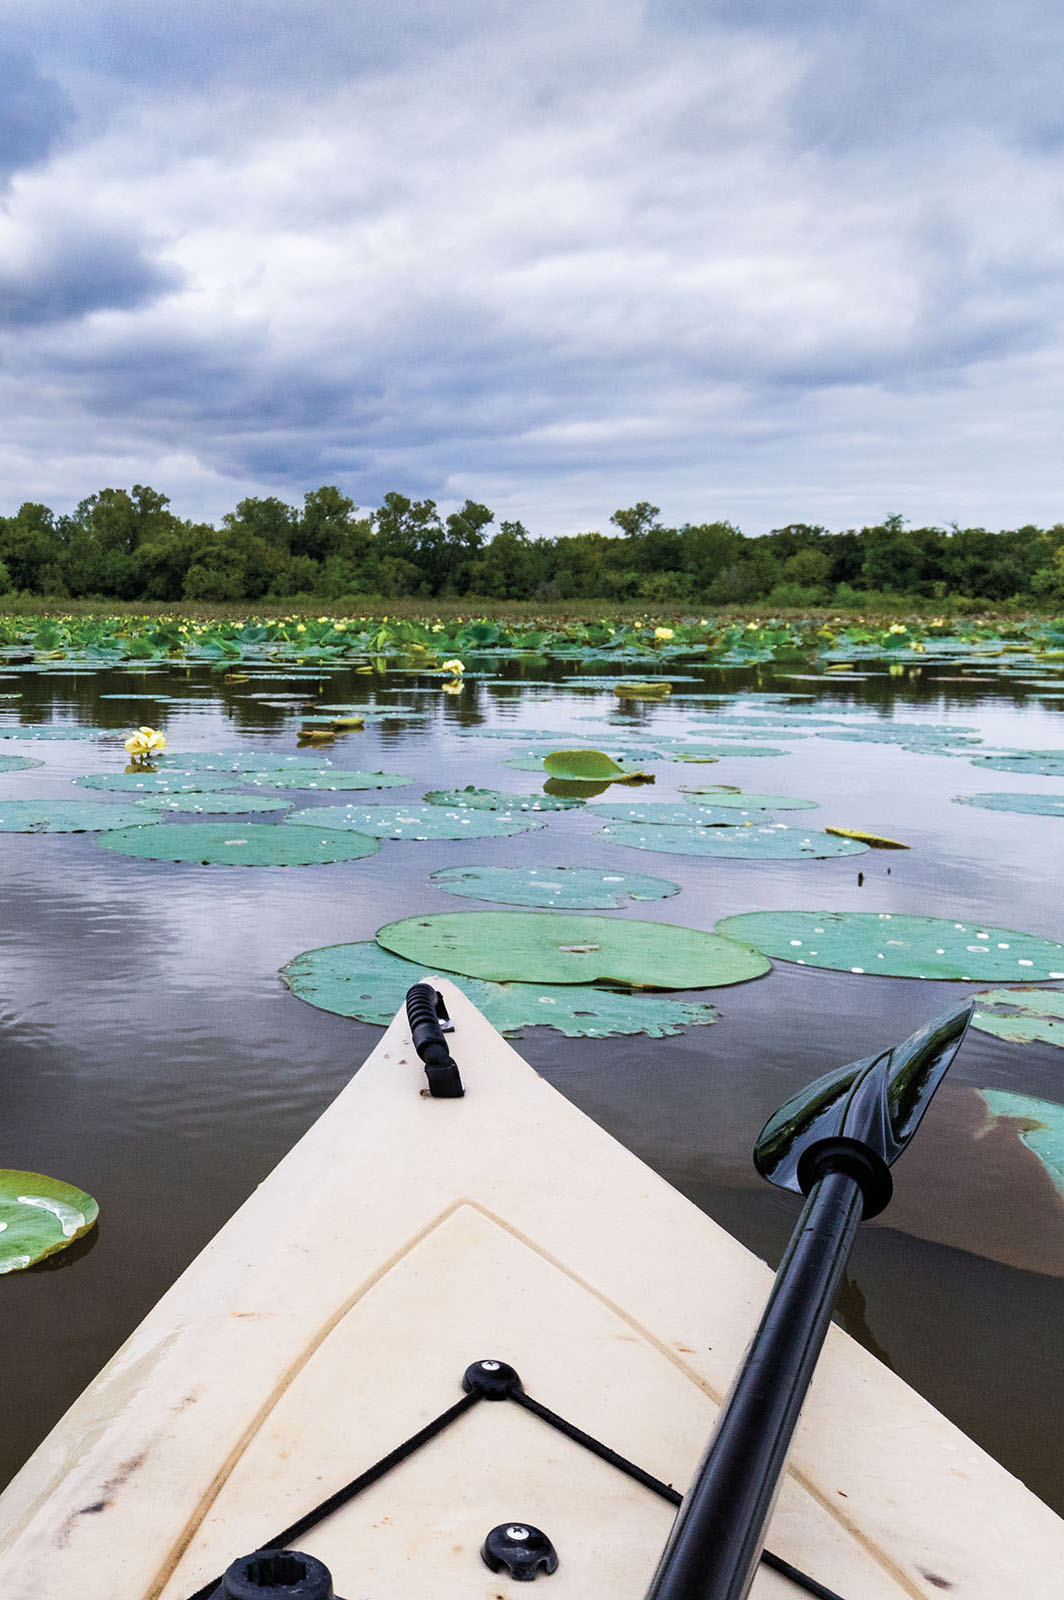 A view of lily pads and still water over the bow of a white kayak